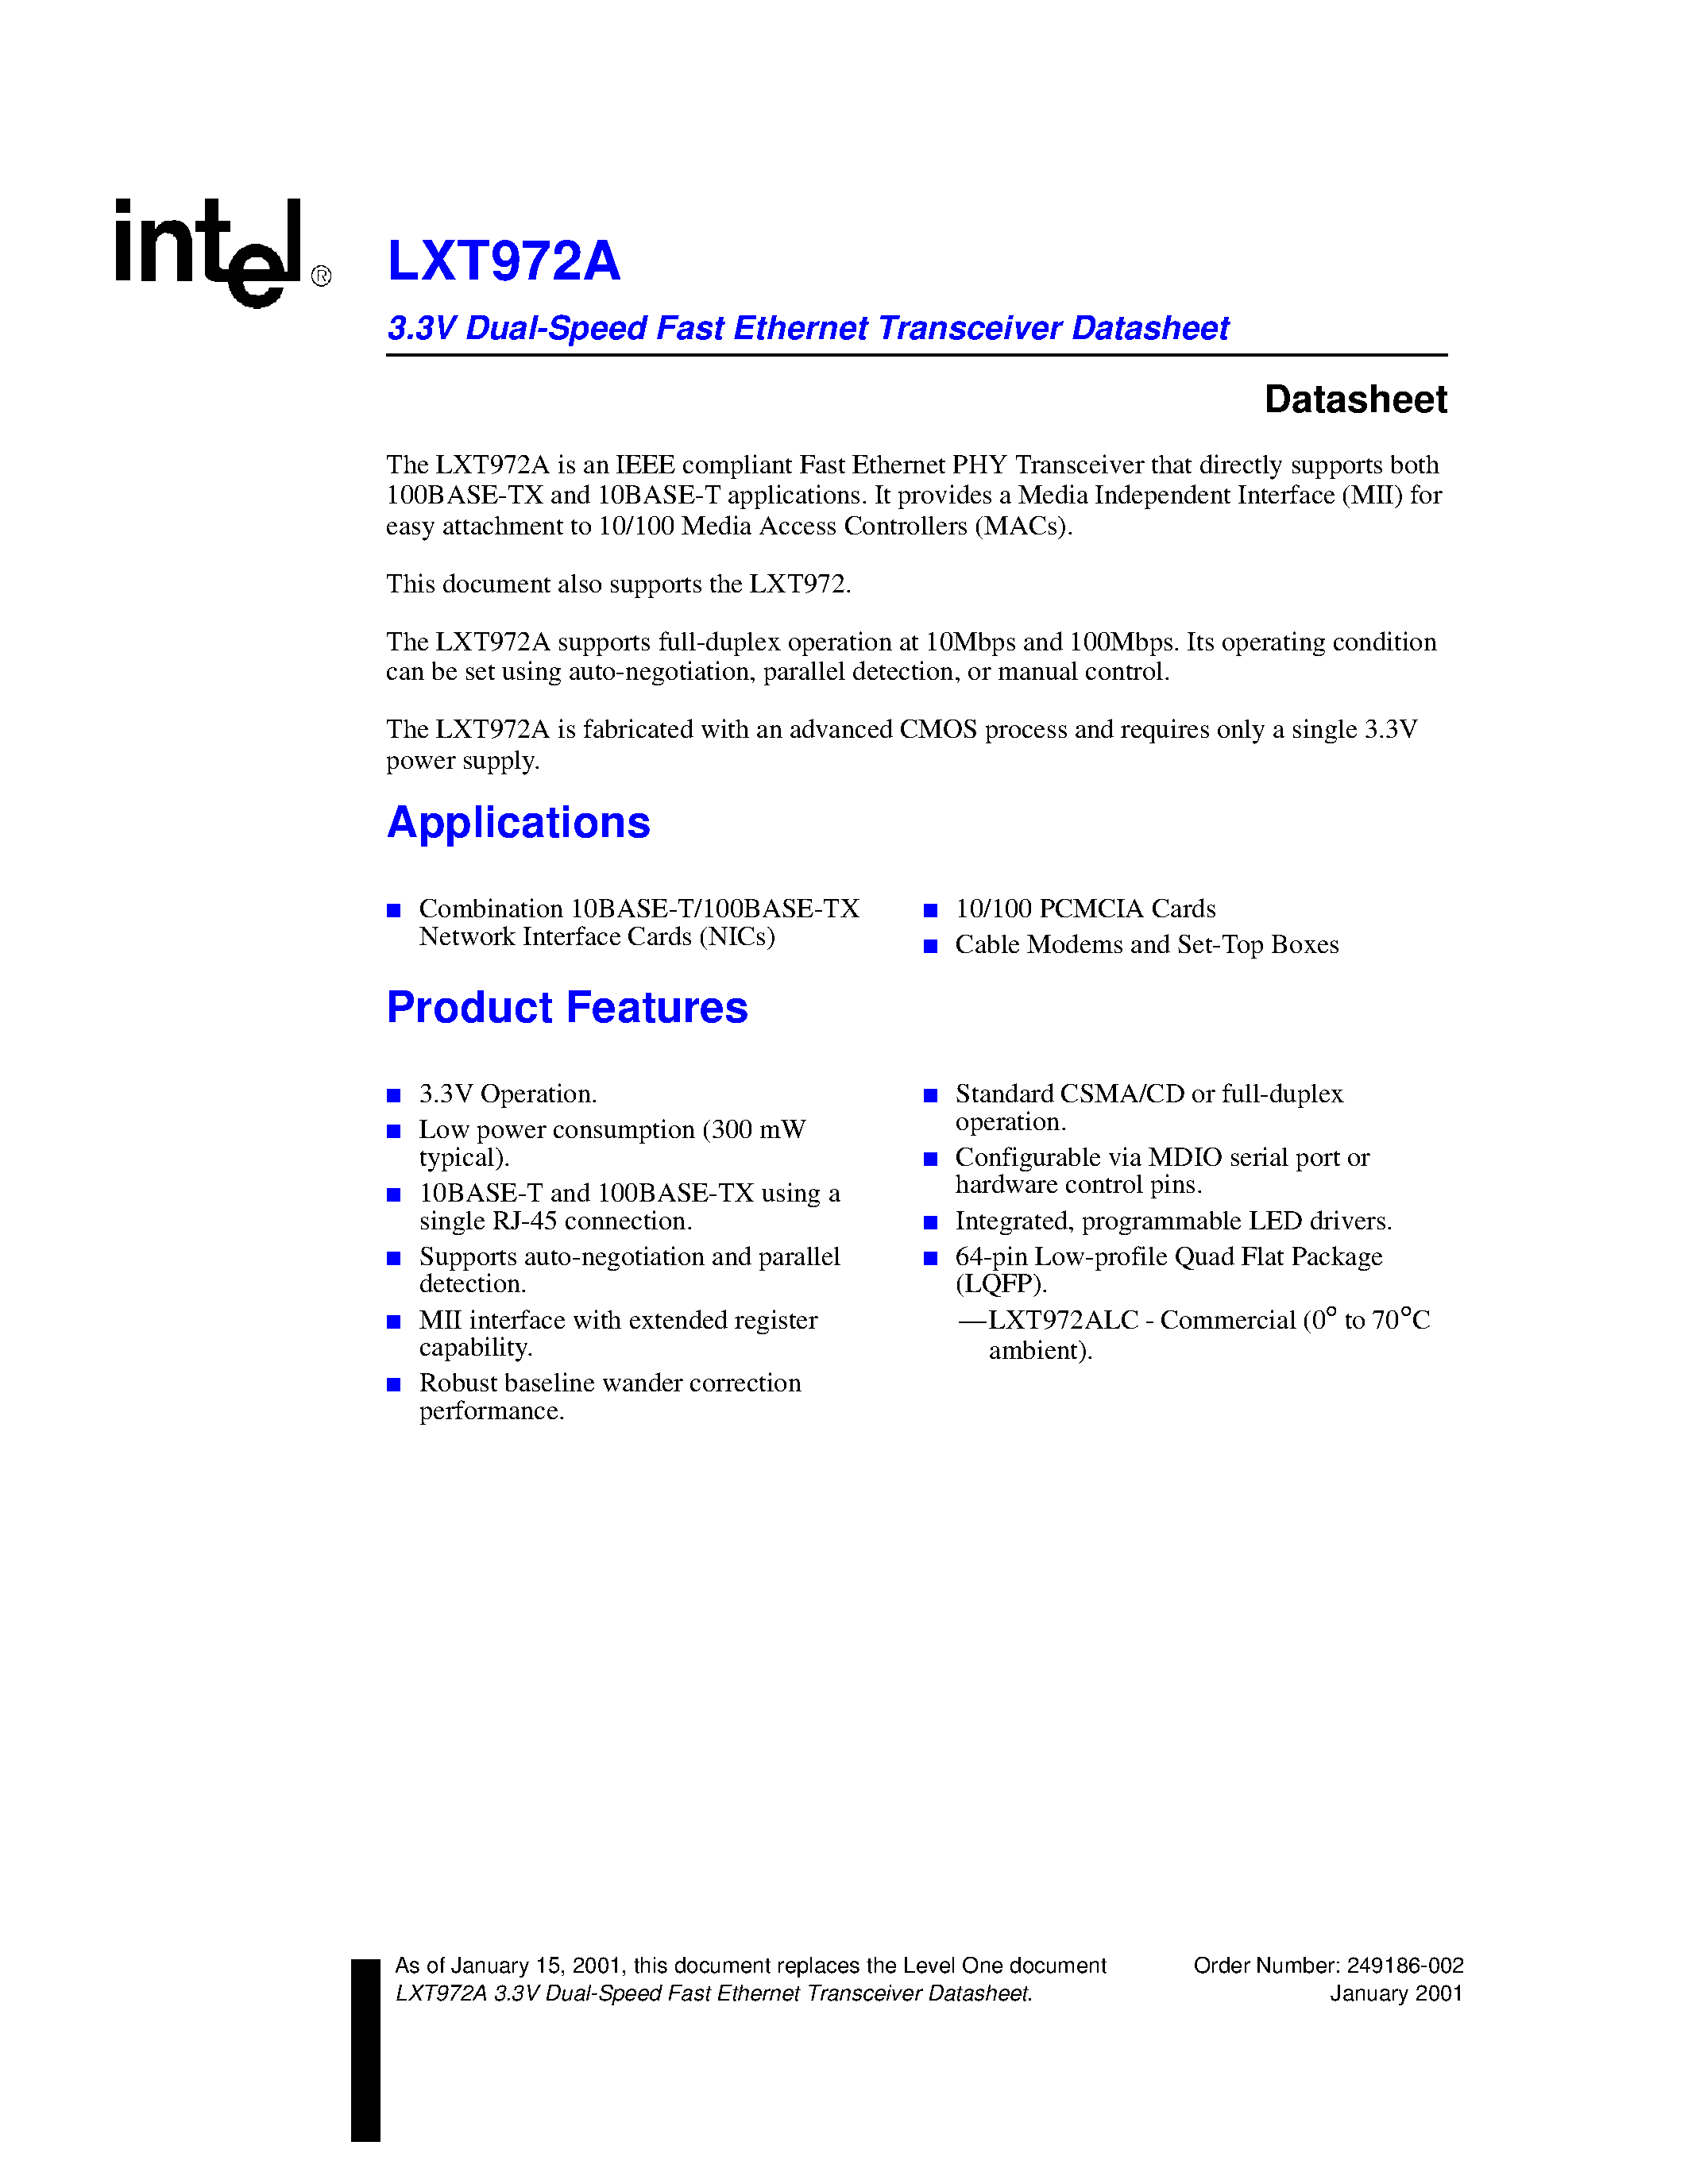 Datasheet LXT972A - 3.3V Dual-Speed Fast Ethernet Transceiver Datasheet page 1